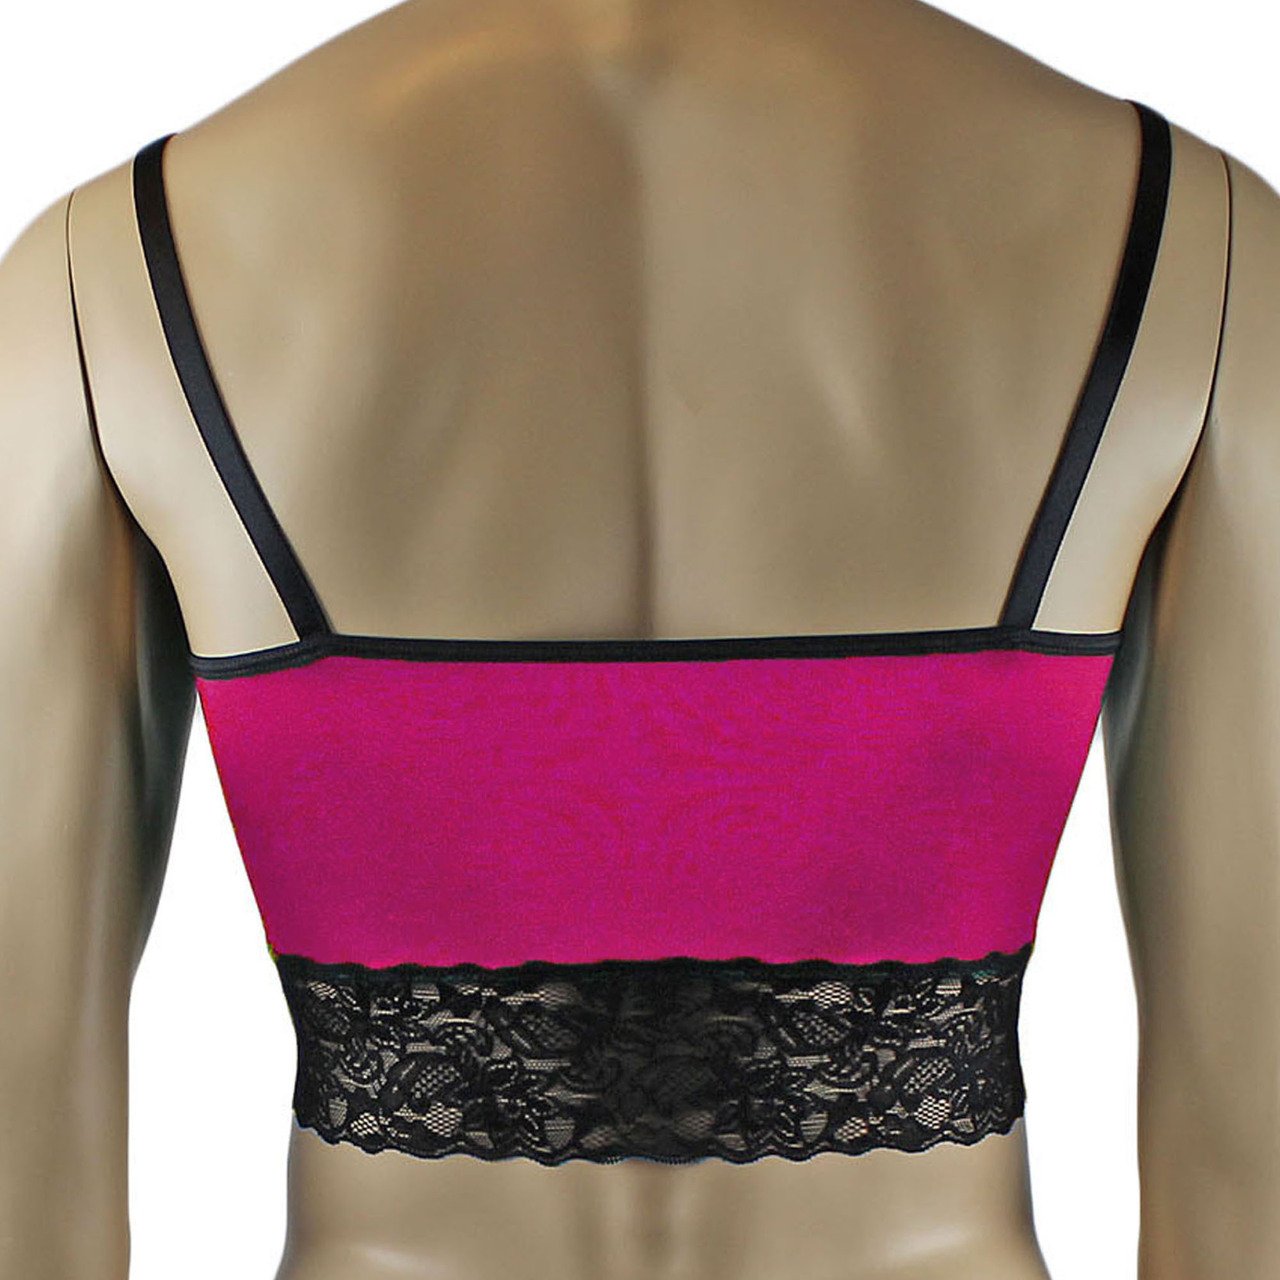 Mens Glamour Camisole Top and Pouch G string with Lace Trim - Sizes up to 3XL (raspberry & black plus other colours)